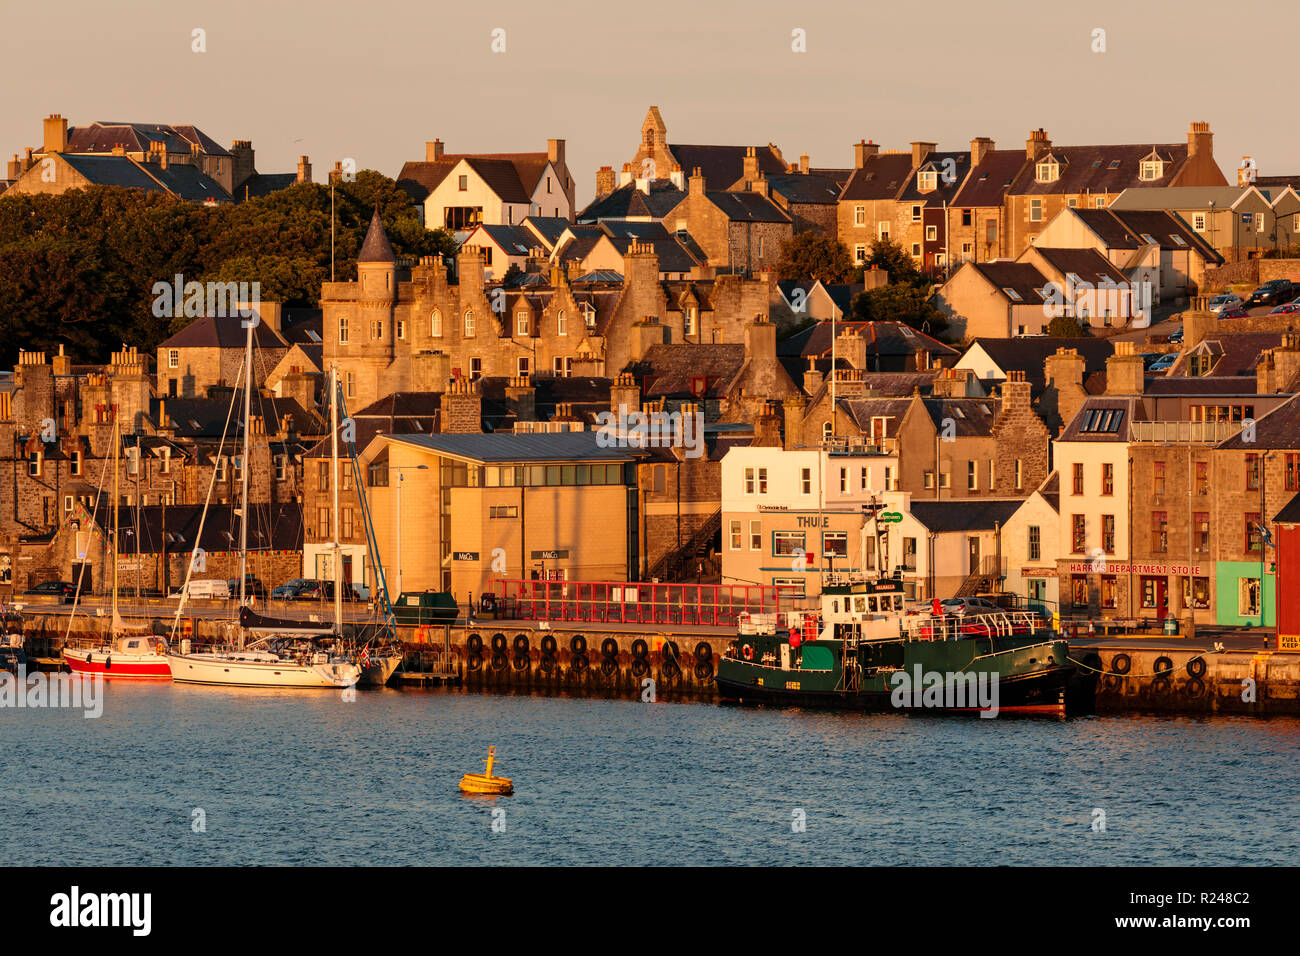 Lerwick, from the sea, waterfront sandstone buildings and golden early morning, Shetland Islands, Scotland, United Kingdom, Europe Stock Photo